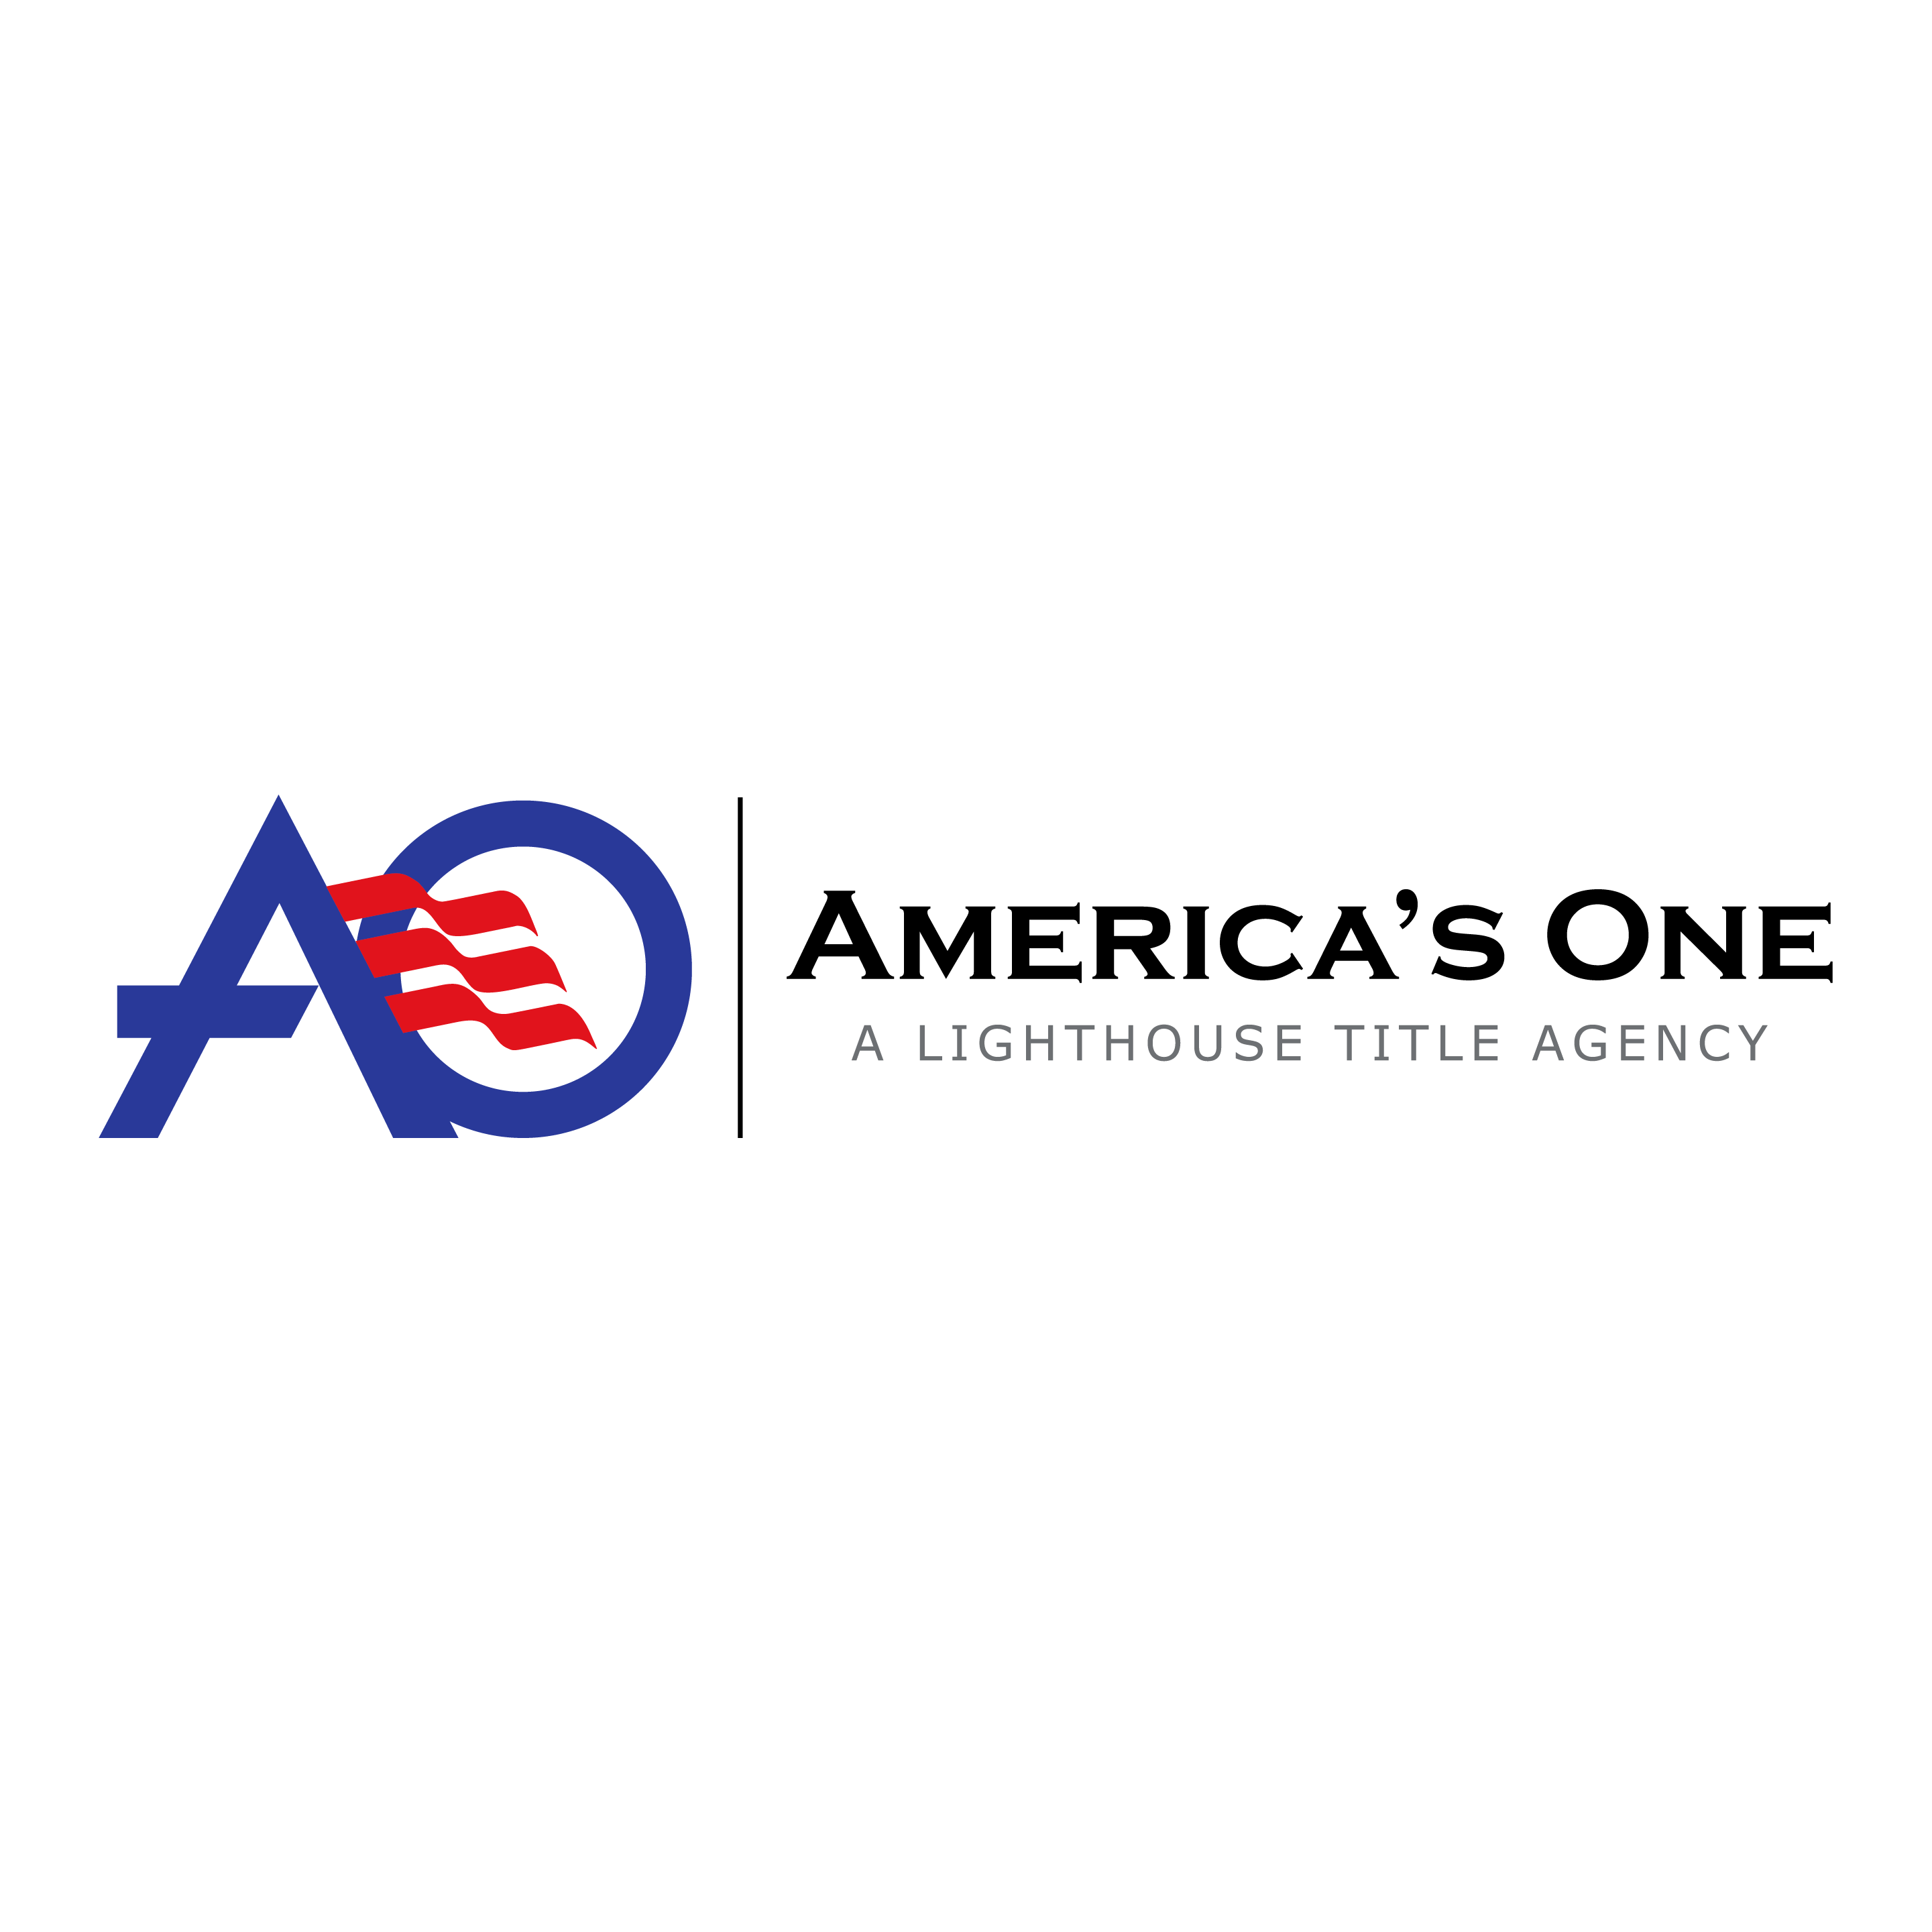 America's One Title, A Lighthouse Title Agency